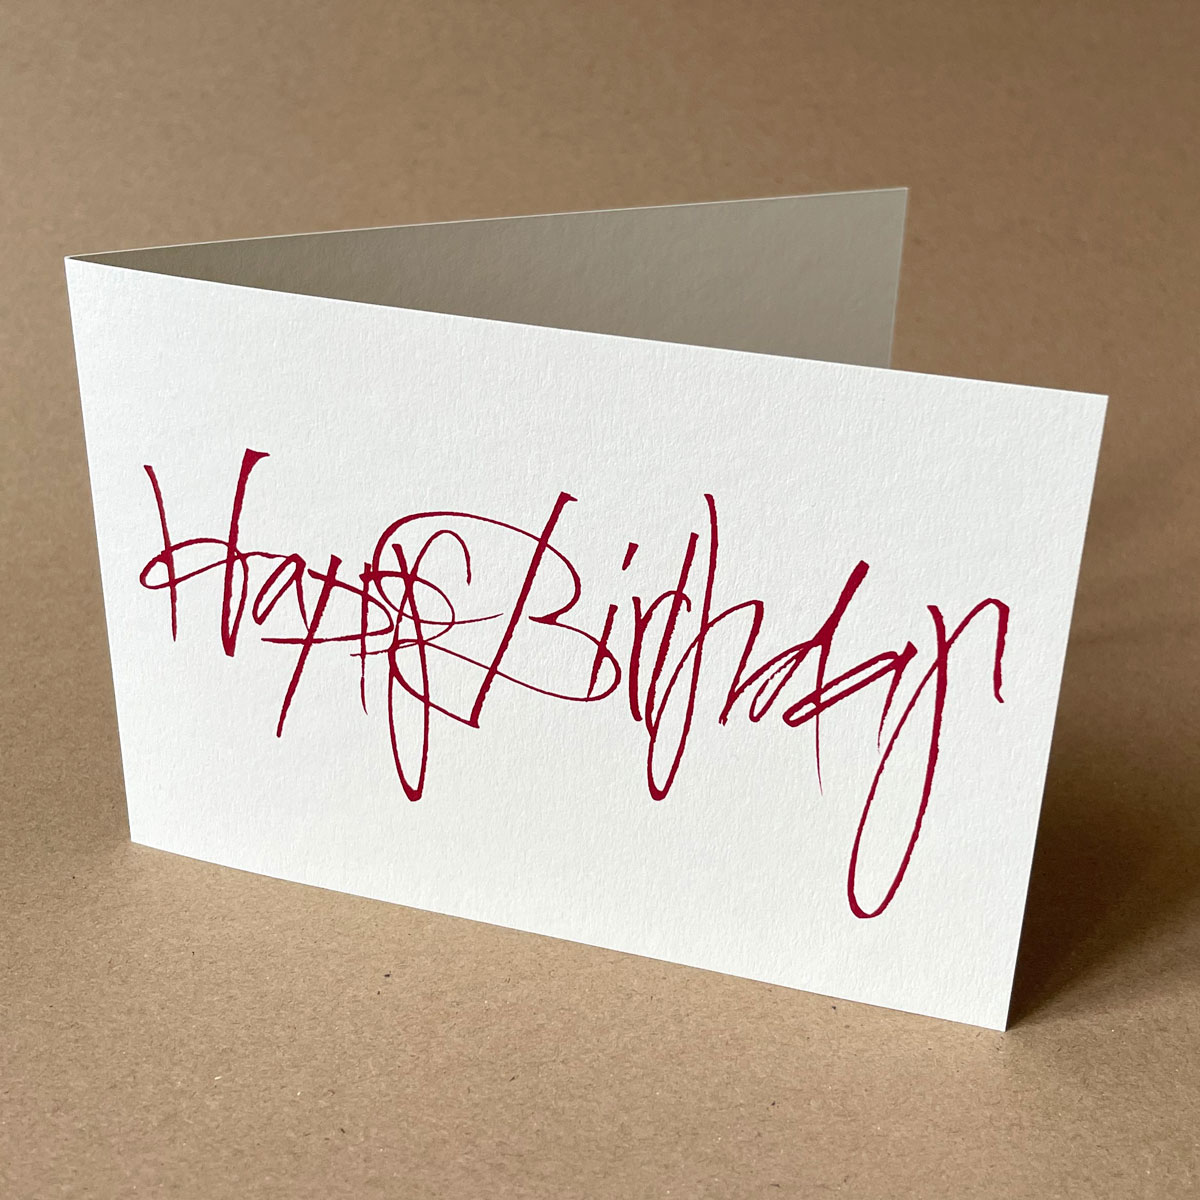 Happy Birthday, calligraphy - greeting cards, printed in red on recycled paper